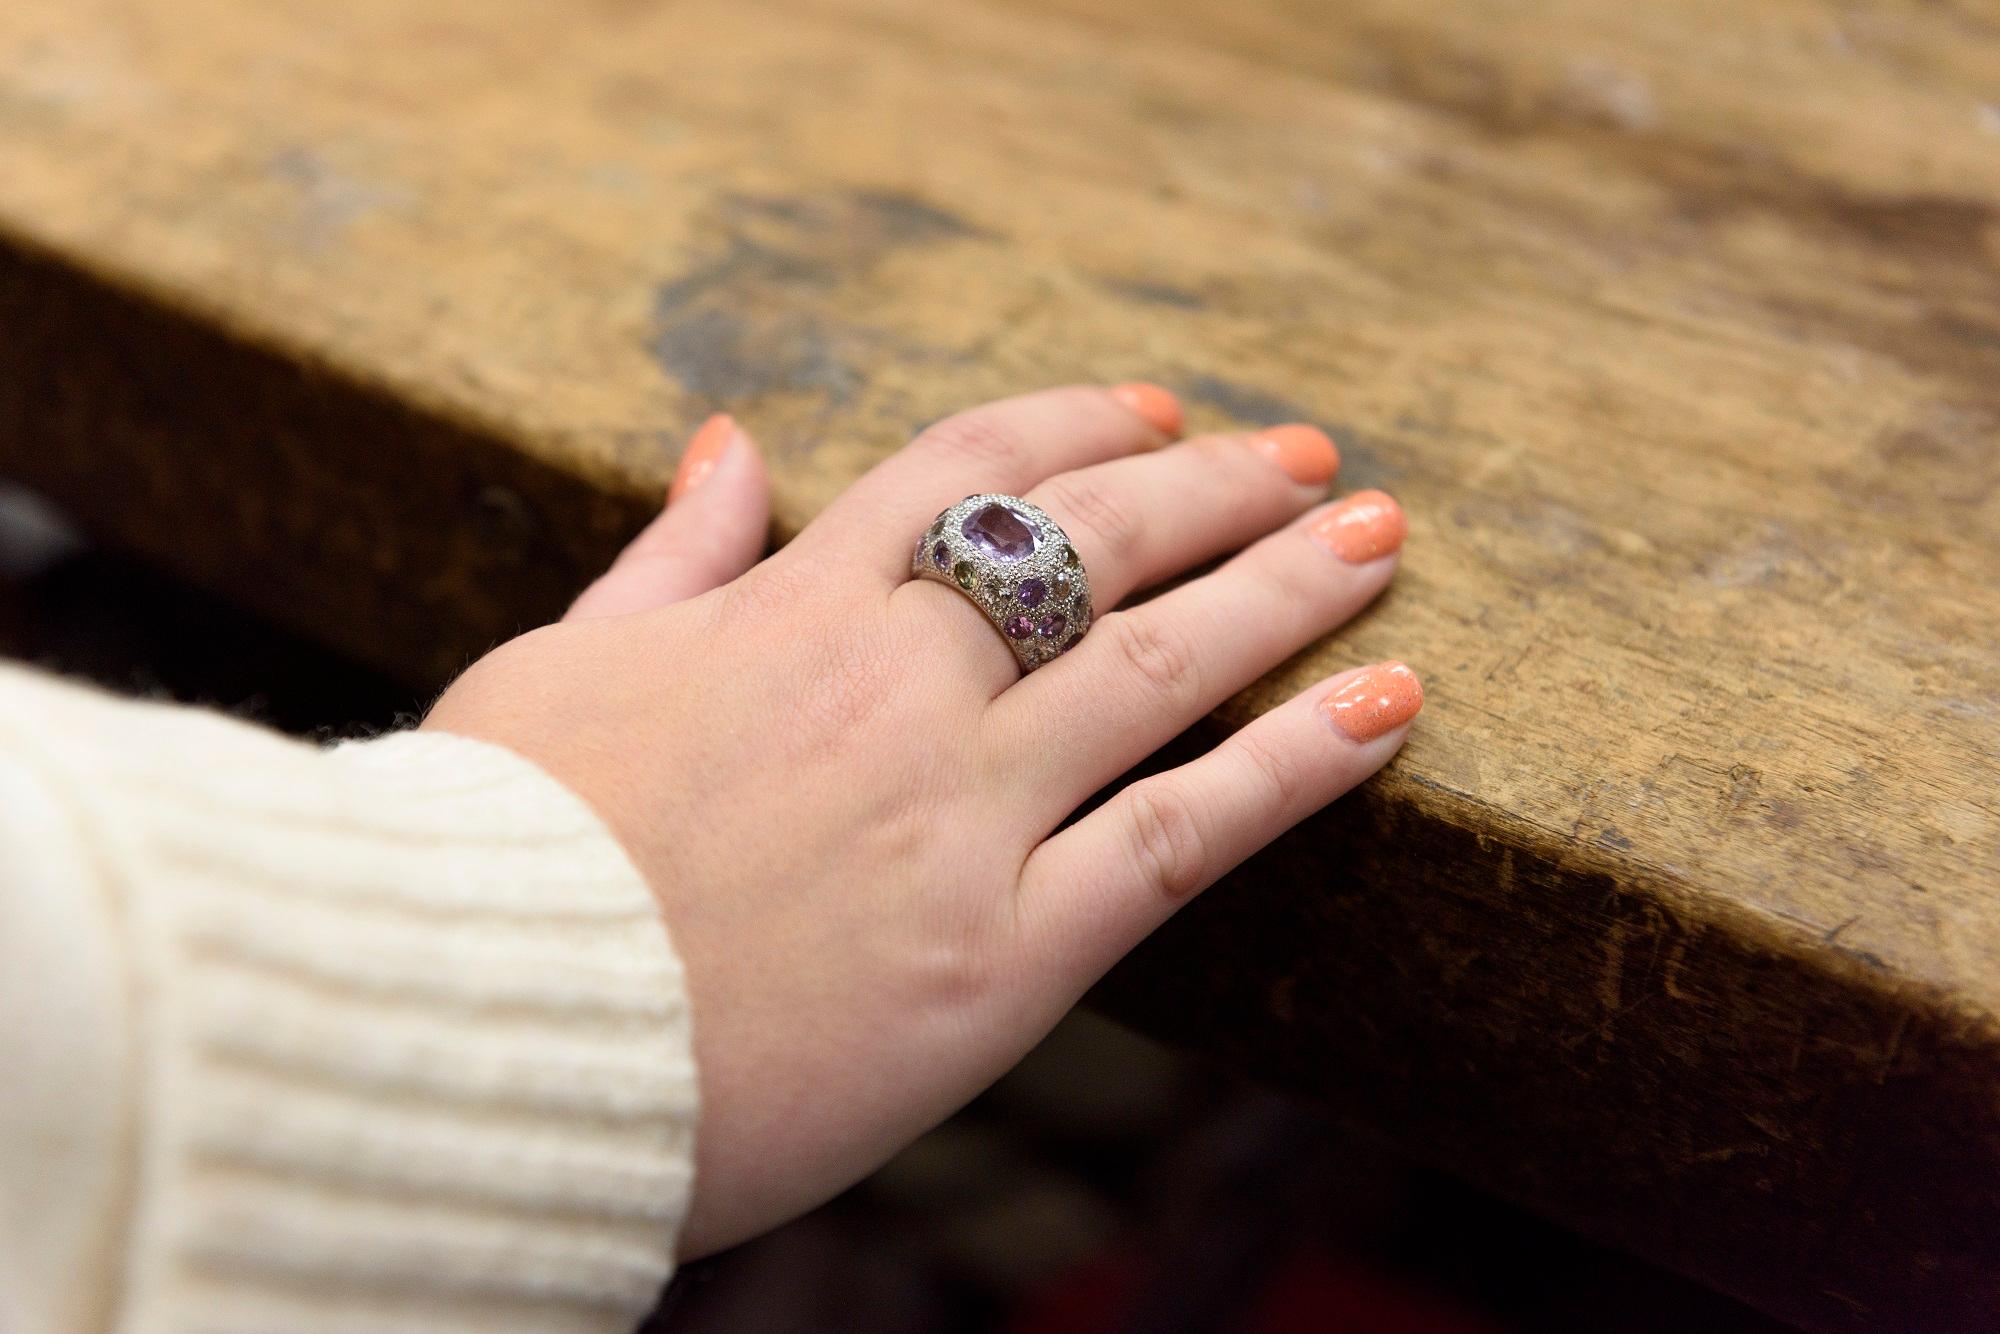 This limited edition ring is the only one to ever be made. Totally unique and totally stunning! This 18kt white gold diamond and multi-kunzite ring is made from the finest quality metal and gemstones. This ring is a size K1/2. Dazzle this Christmas